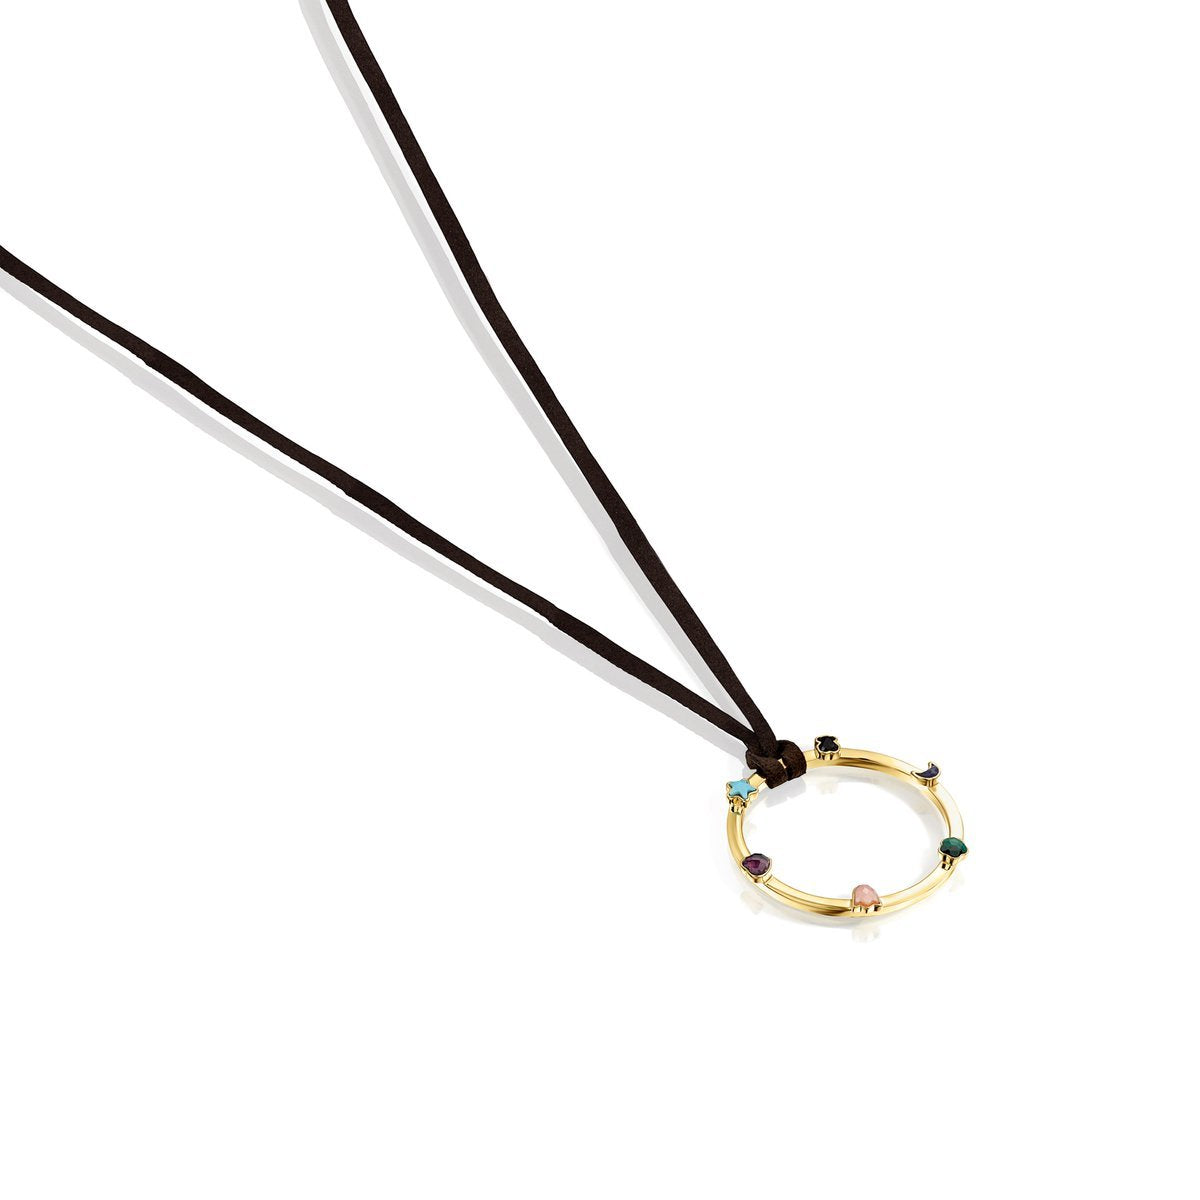 Tous Glory Necklace in Gold Vermeil with Gemstones 918594510